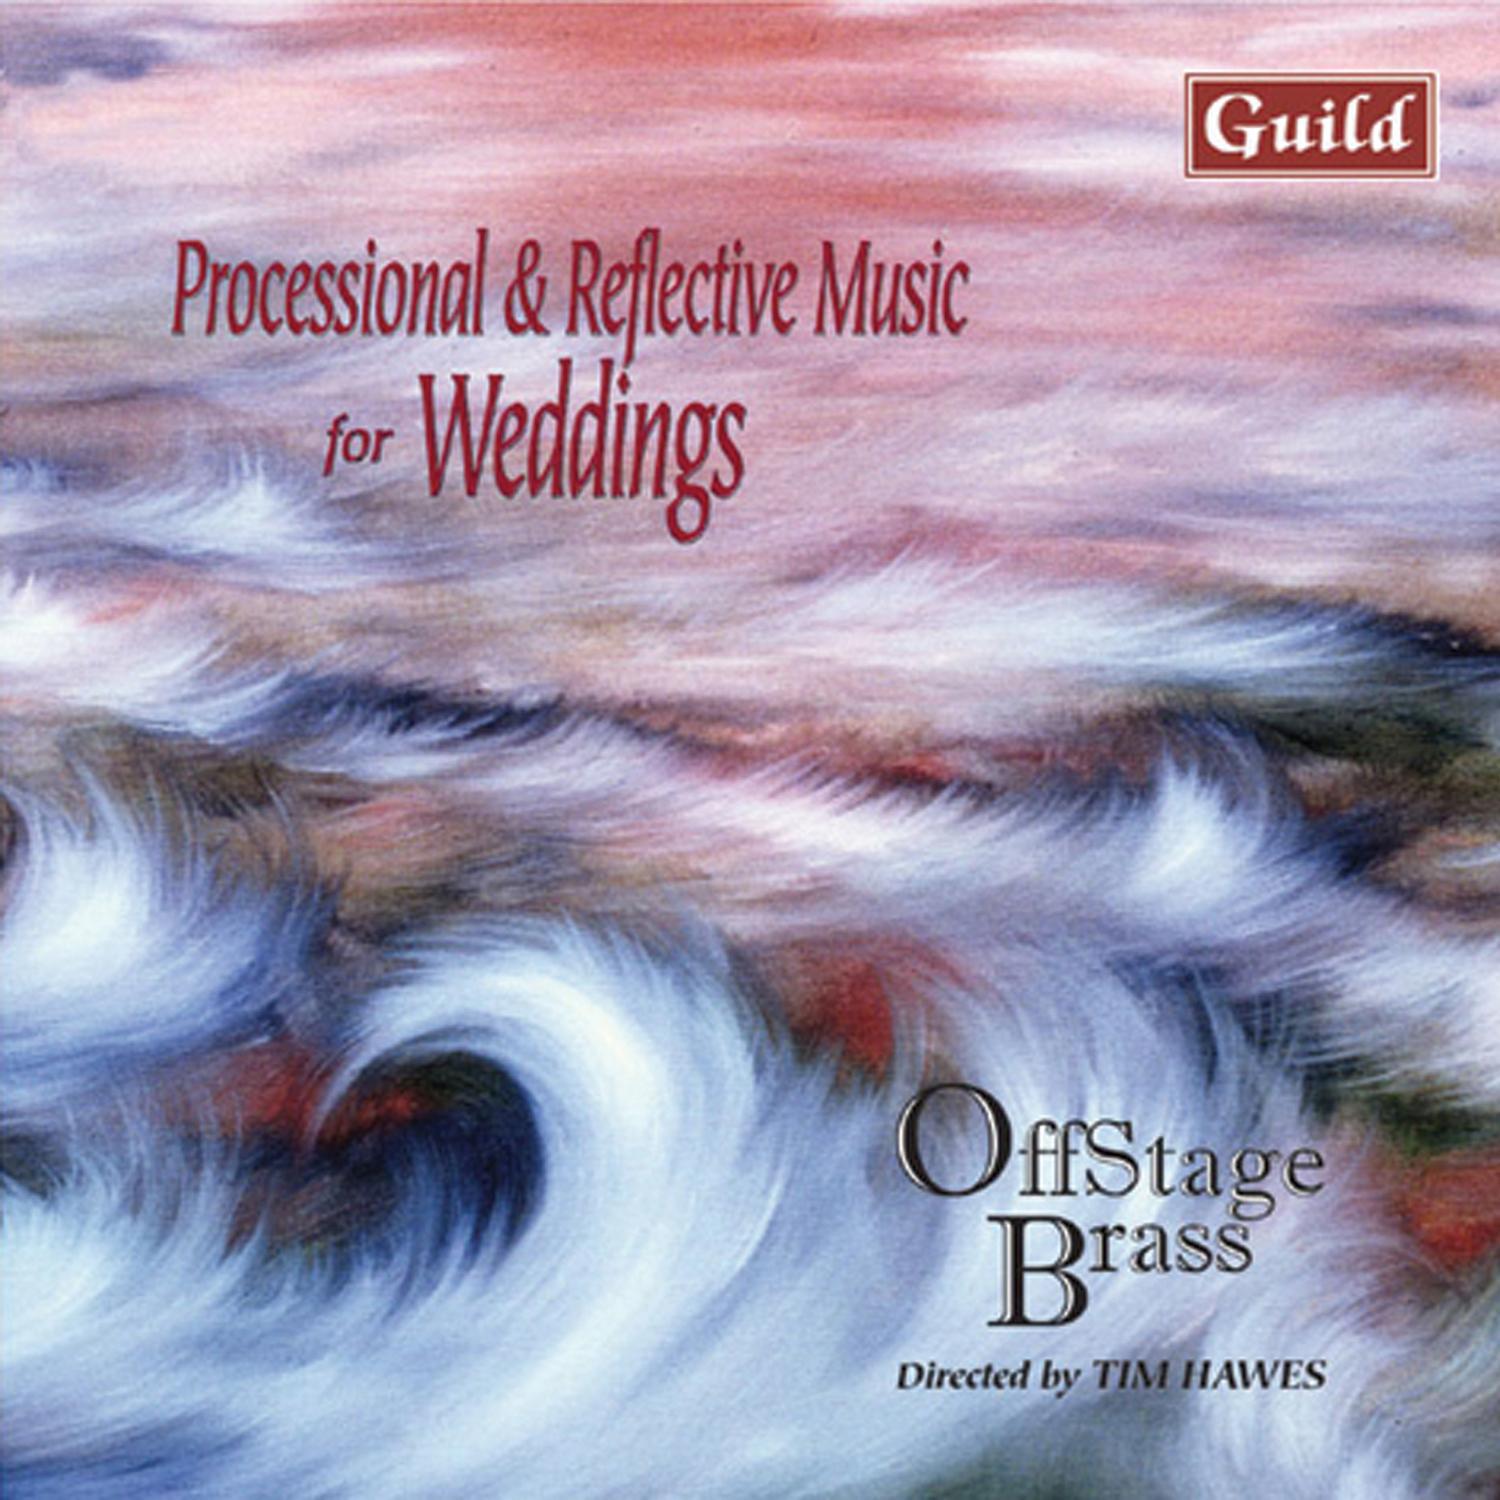 Processional & Reflective Music for Weddings